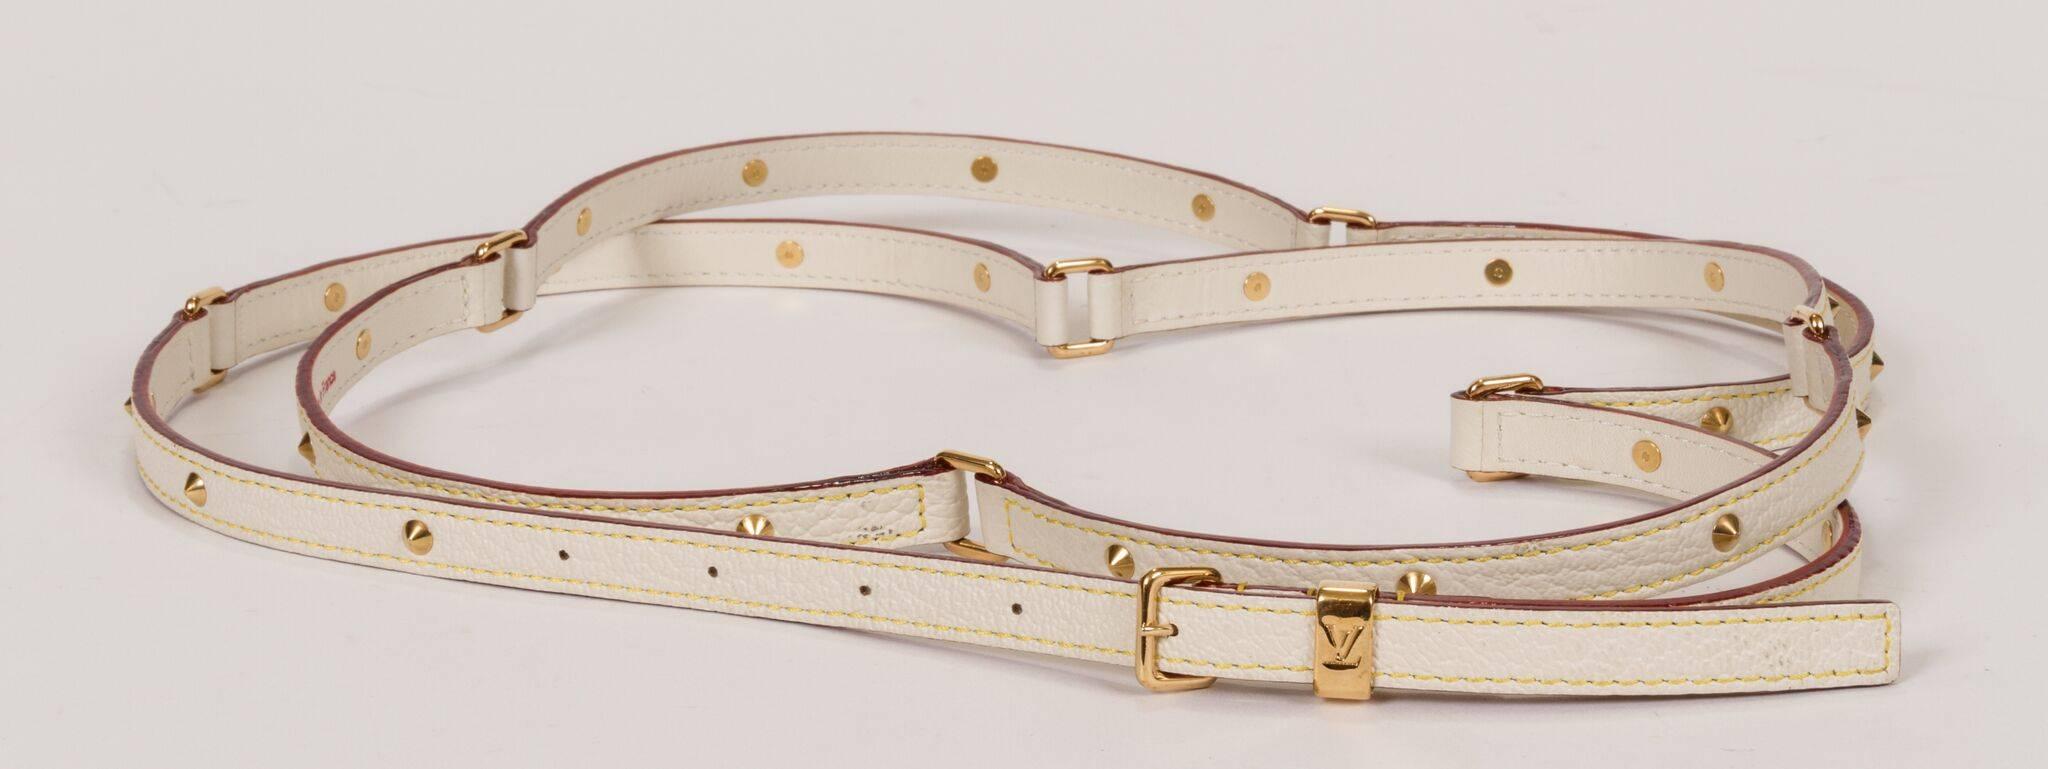 Louis Vuitton Suhali collection belt. Cream color leather with gold tone studs. Excellent condition. Comes with original box.